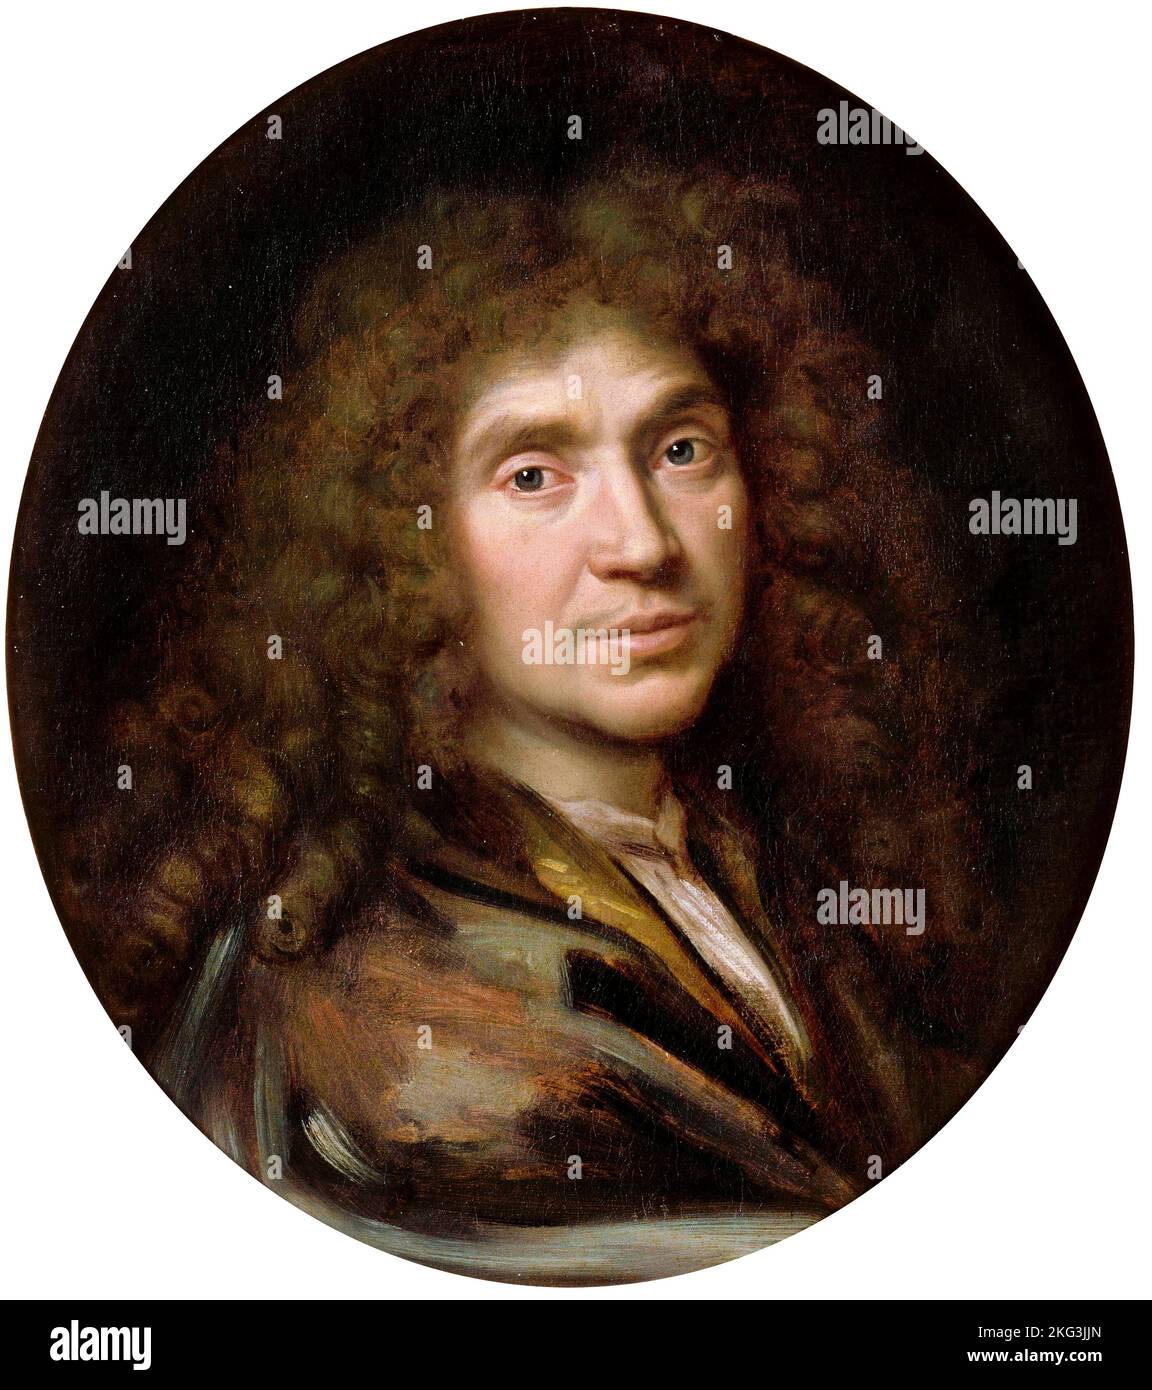 Pierre Mignard I; Moliere; Circa 1658; Oil on canvas; Conde Museum, Chantilly, France. Stock Photo